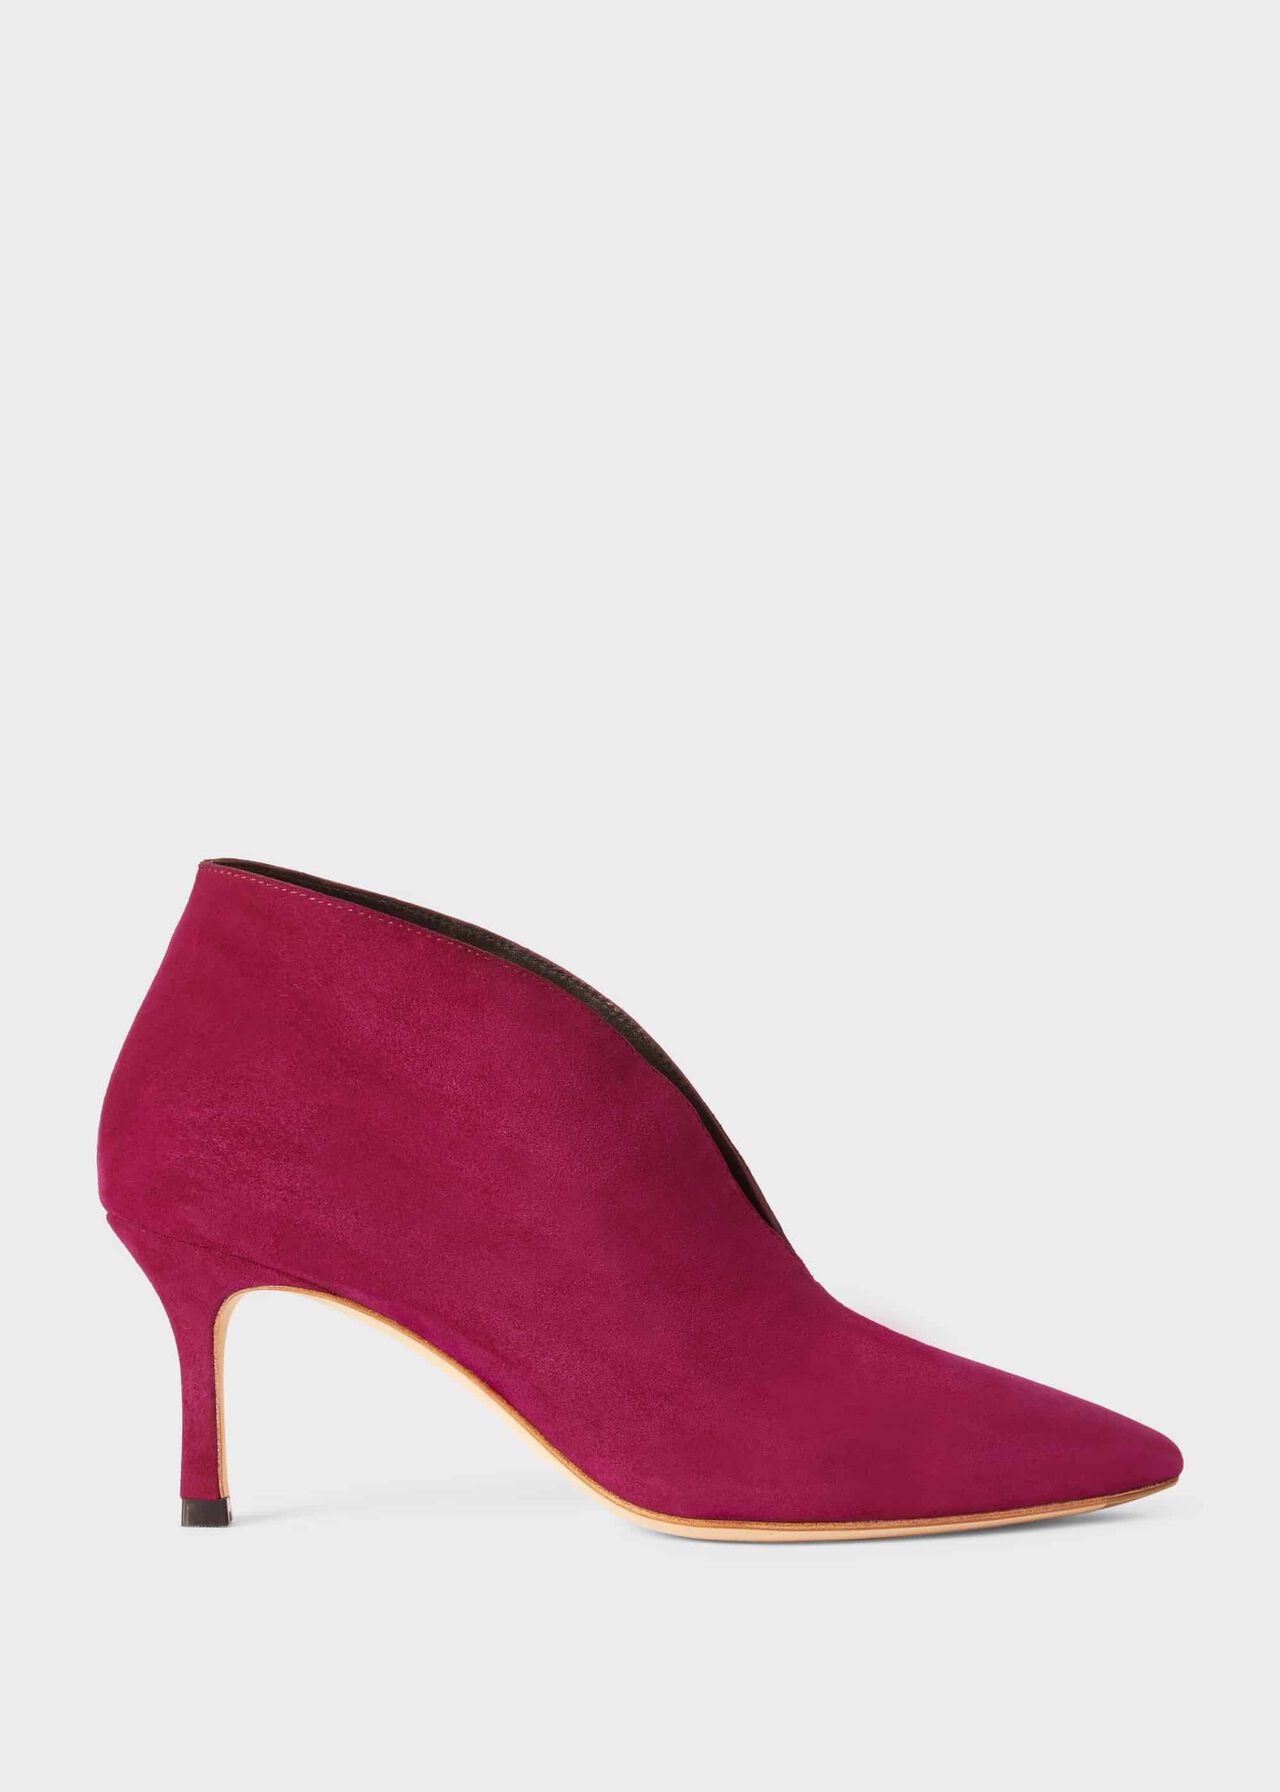 Sienna Ankle Boots, Raspberry, hi-res